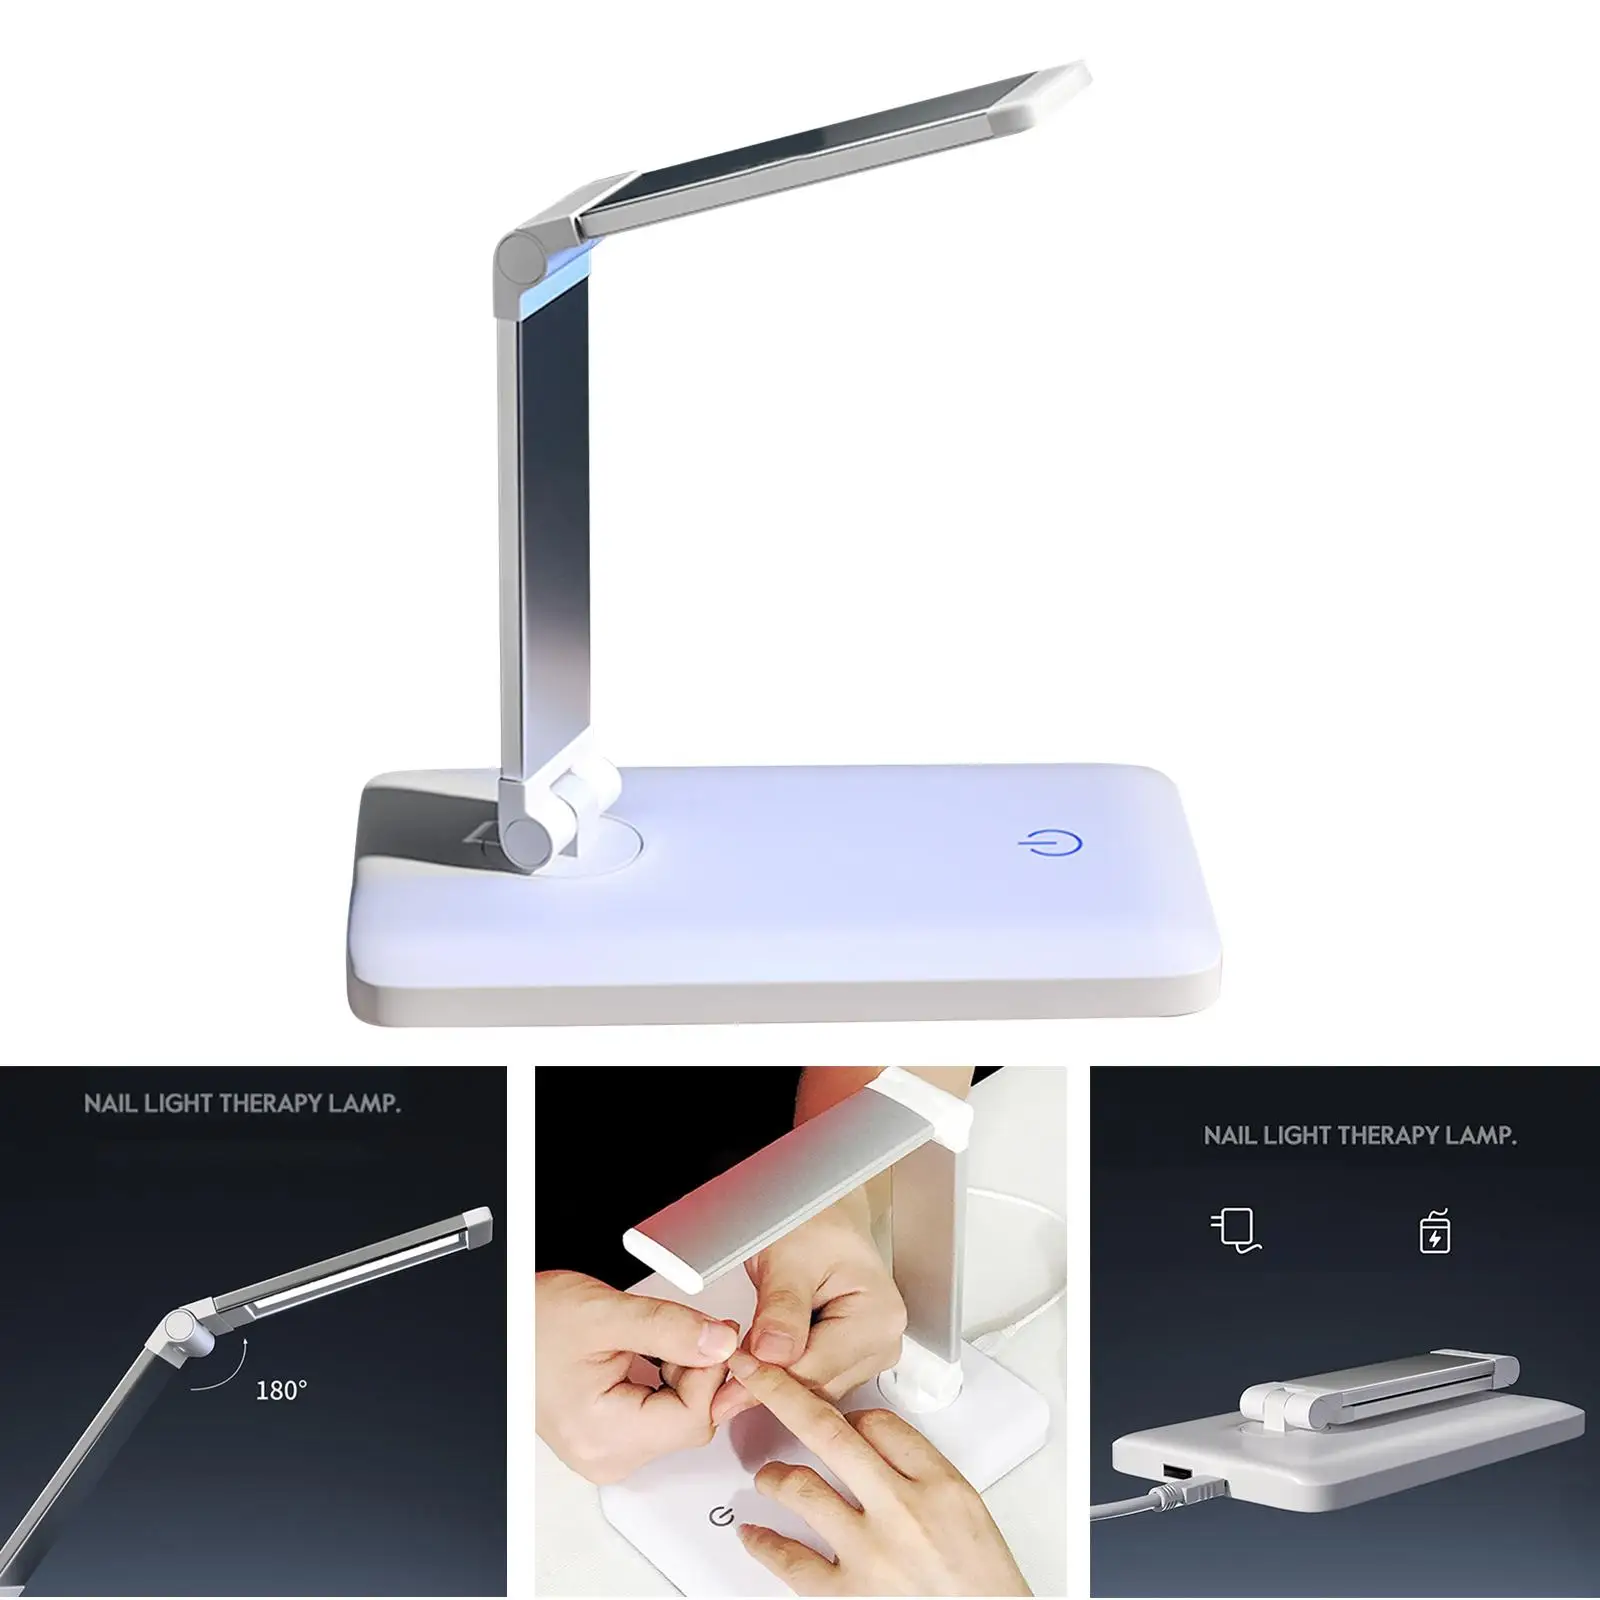 LED Nail Lamp 12W ,Professional Foldable Tools Portable USB Charging Parts ,10 LED Nail Dryer  Light Heating Lamp for  